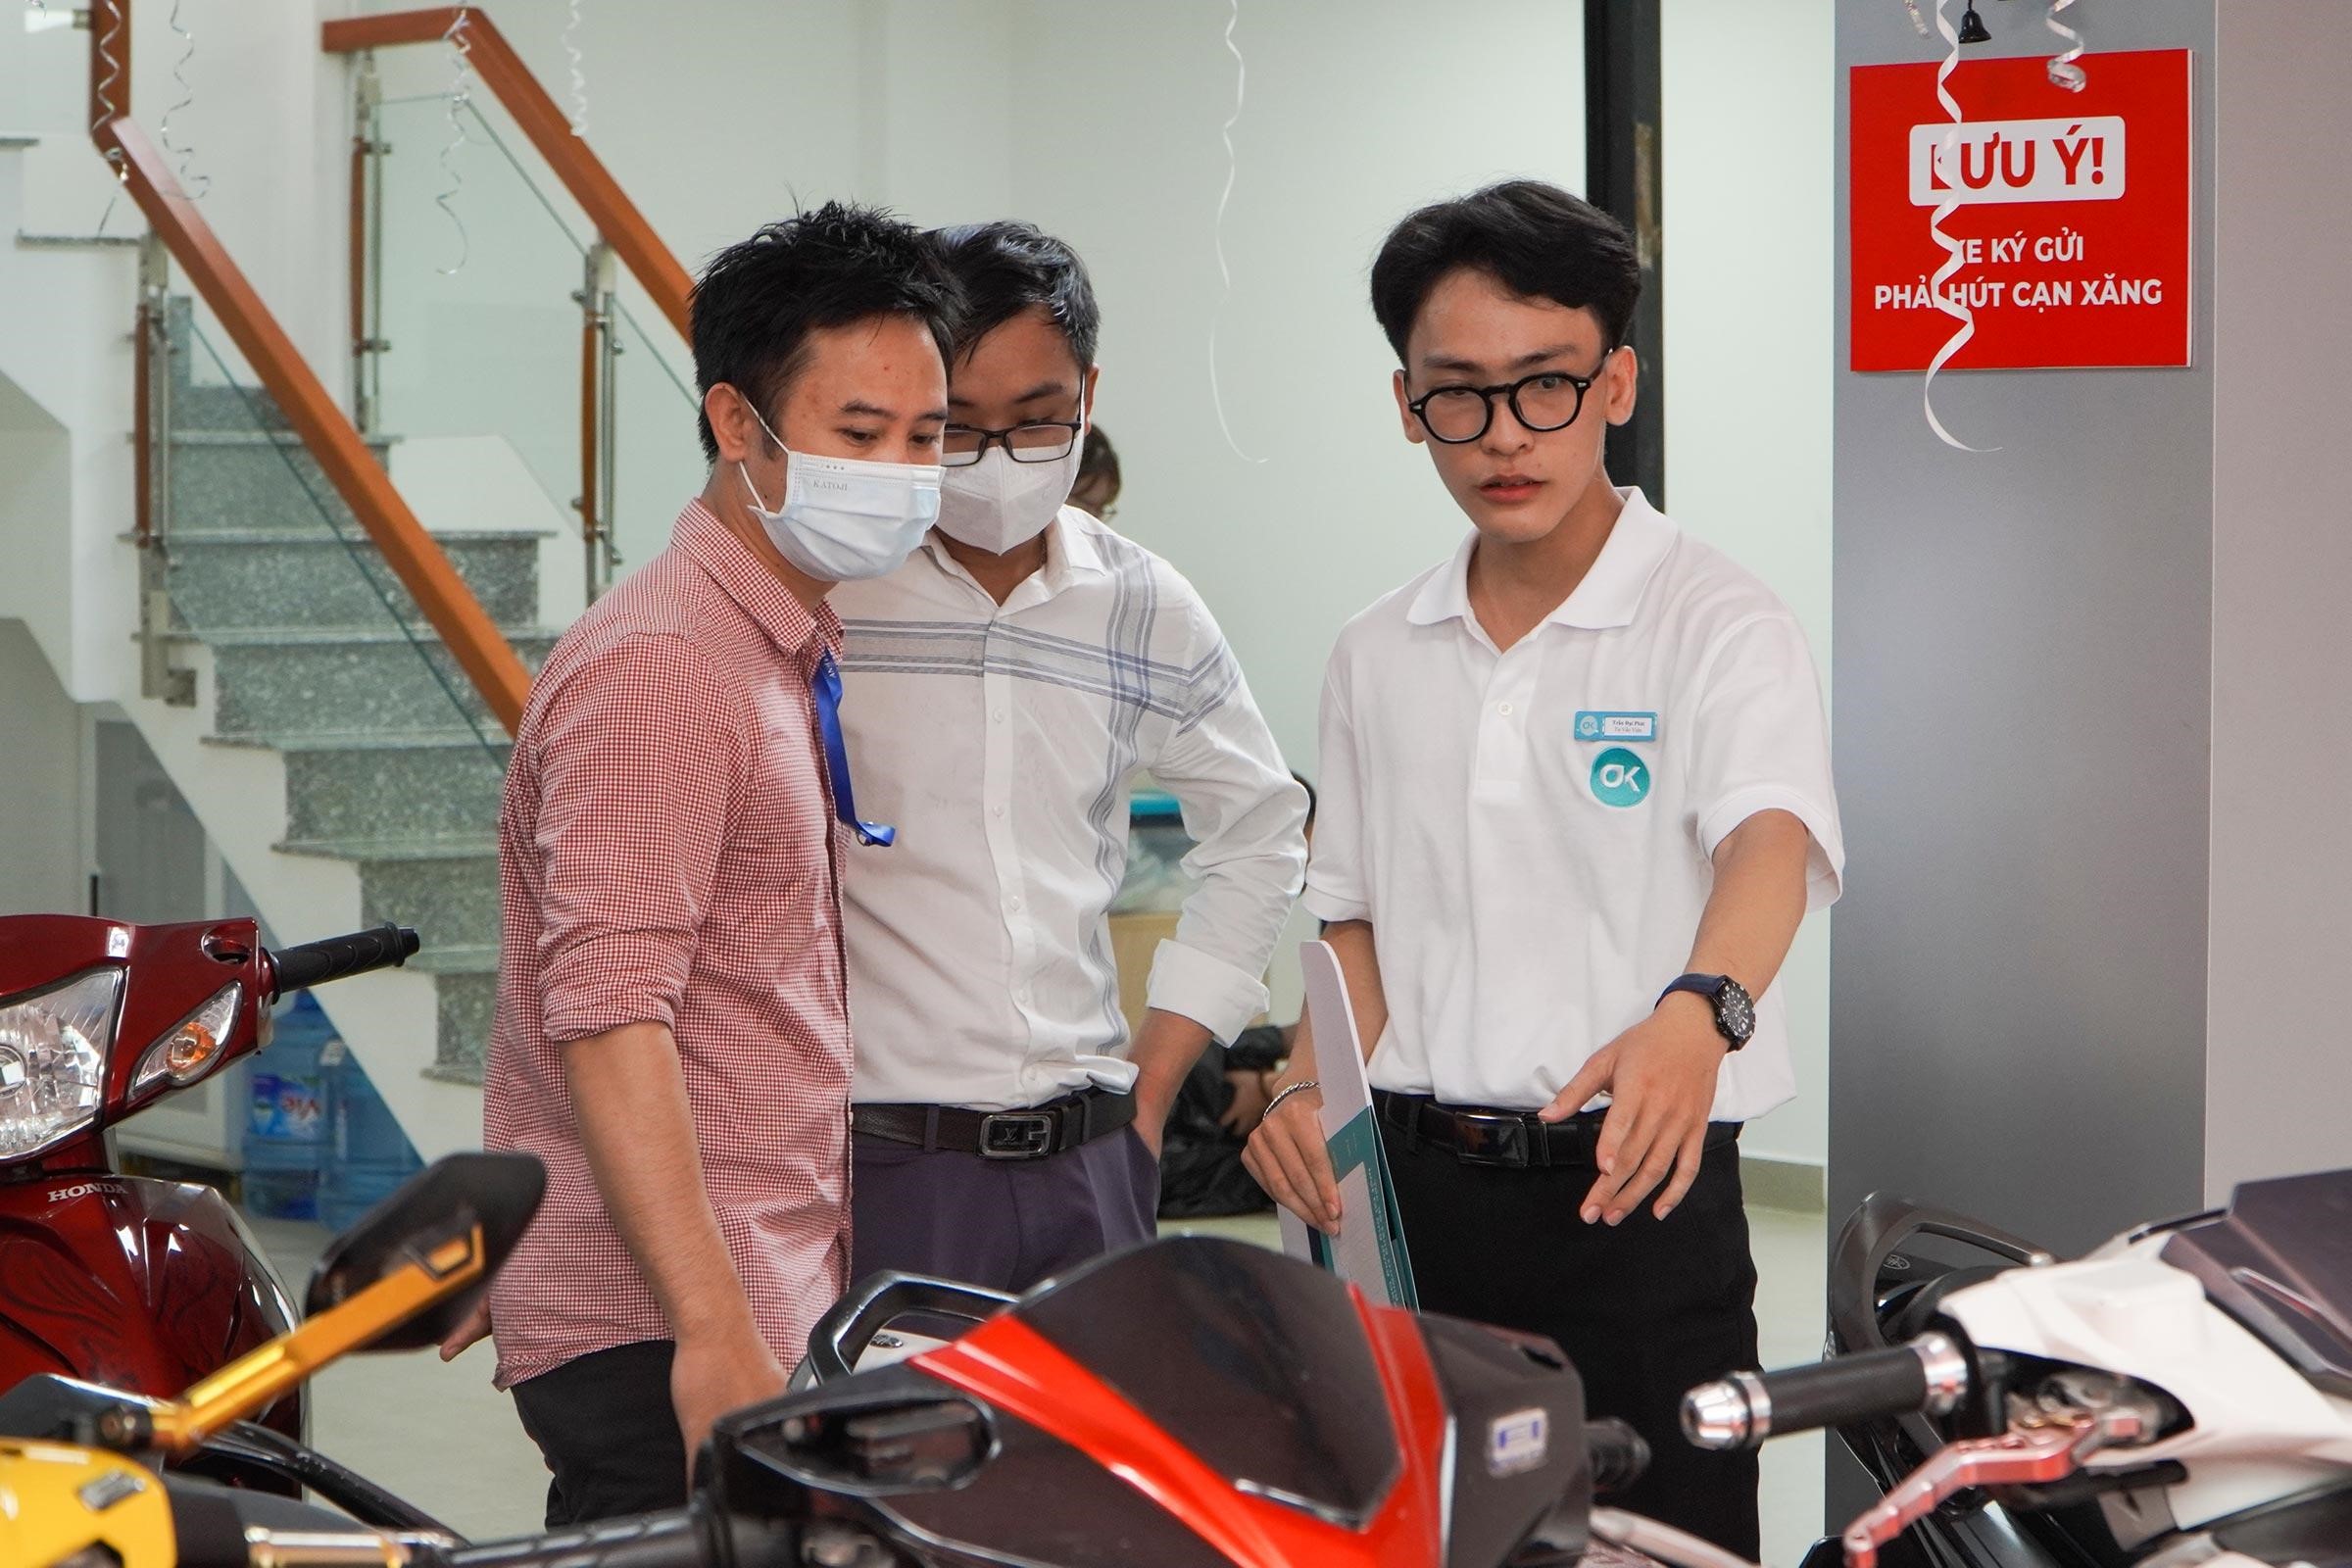 For the first time ever, motorbike buyers in Vietnam can seamlessly benefit from both online – OKXE application – and offline – OKXE Motorbike Service Station.